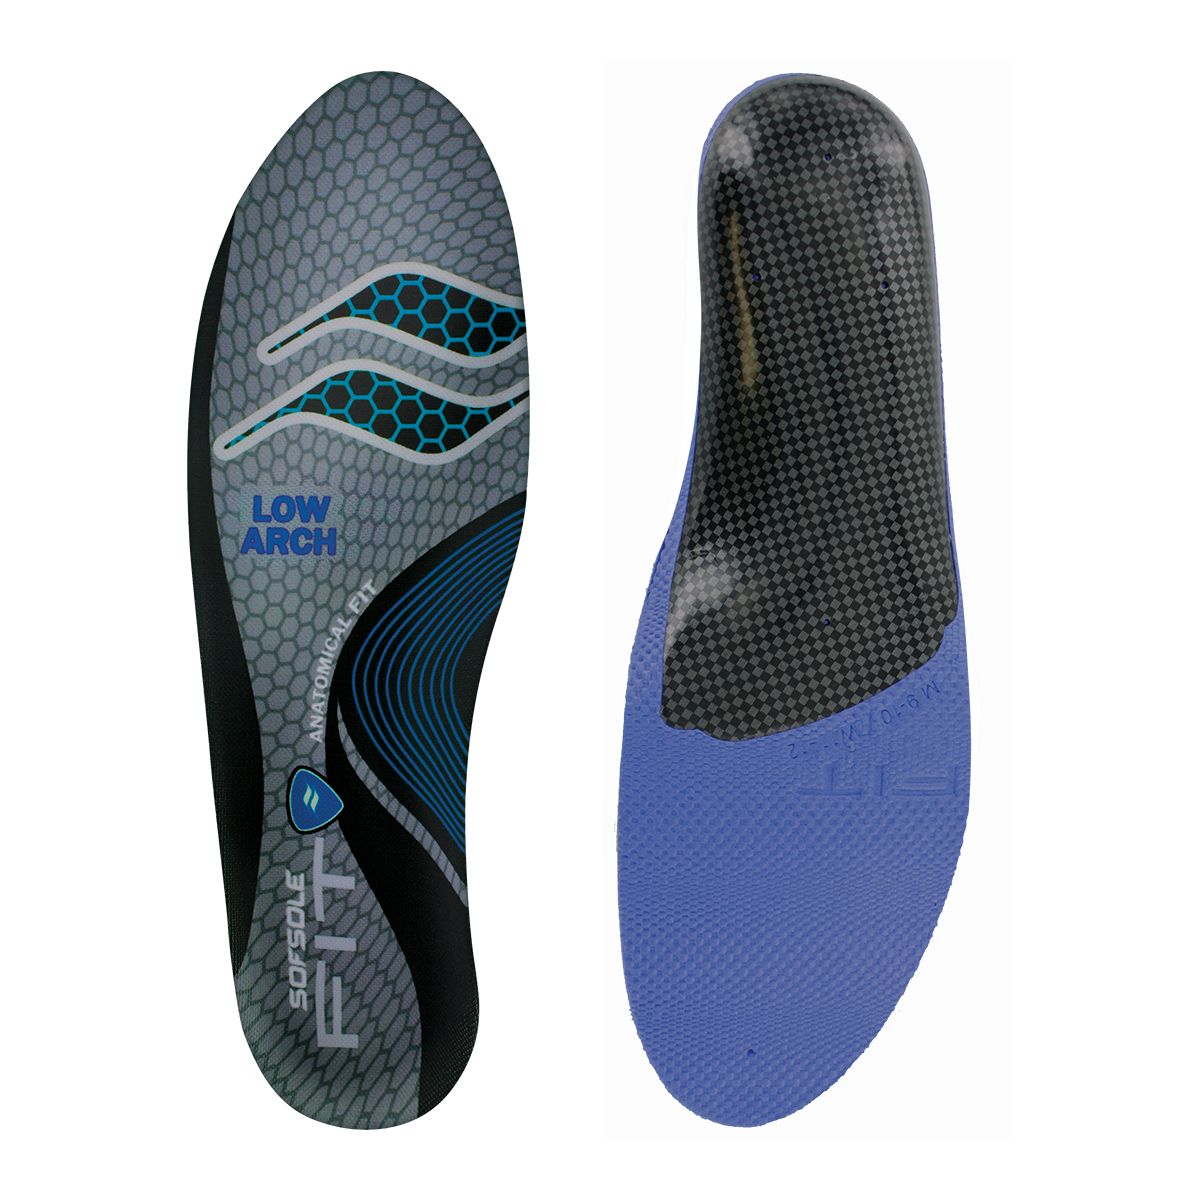 Image of Sof Sole FIT Low Arch Insoles Shoe Inserts